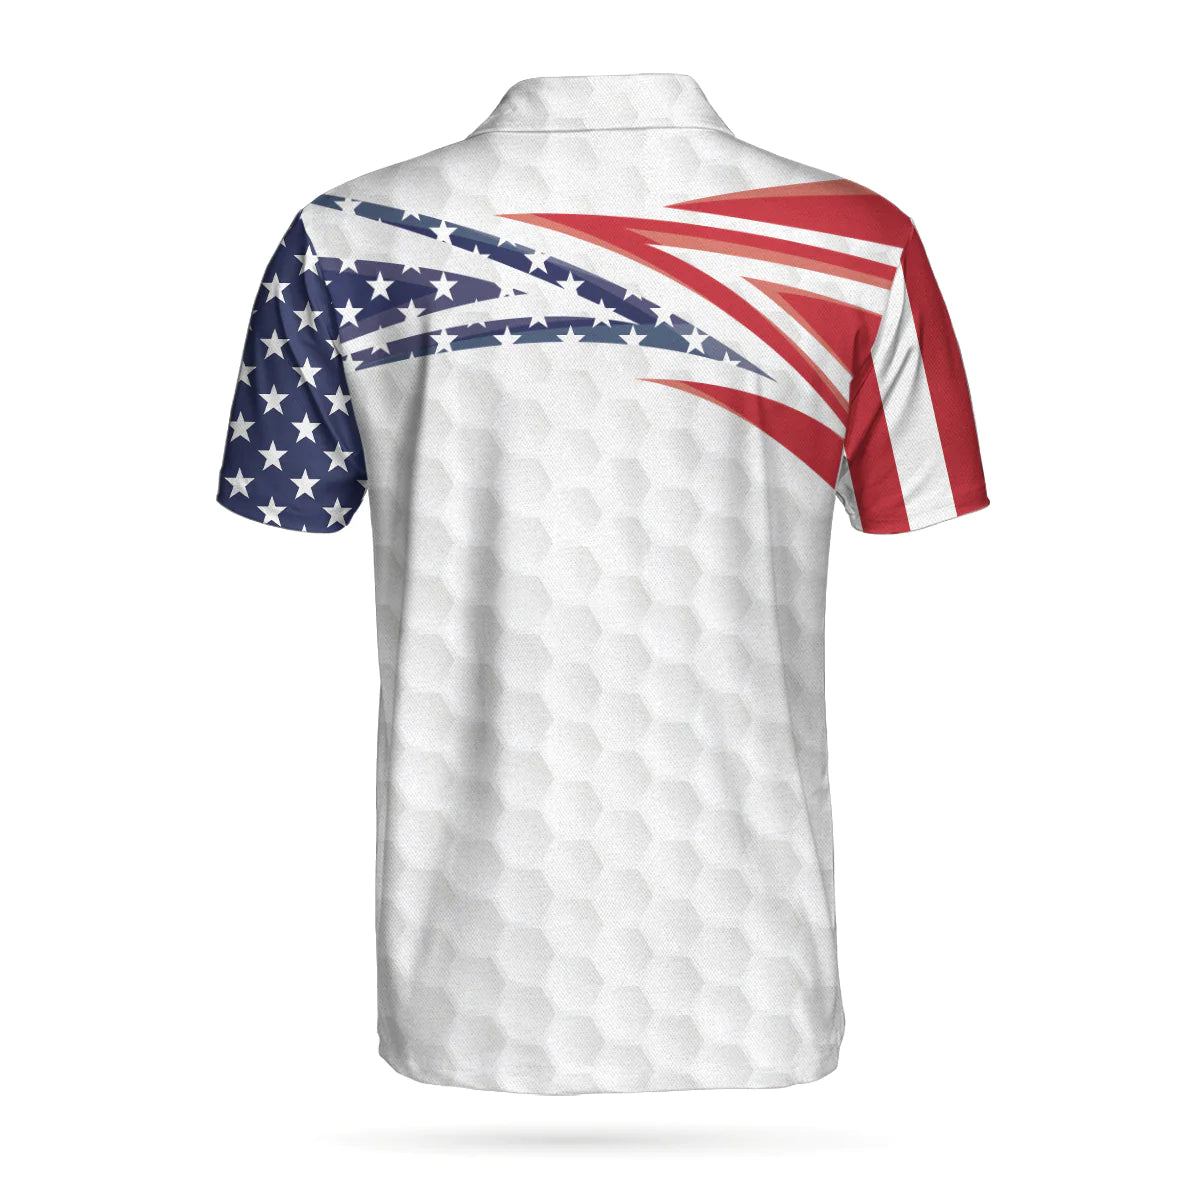 best golf shirt for men personalized american flag polo with the nineteenth hole design gp419 8mvap